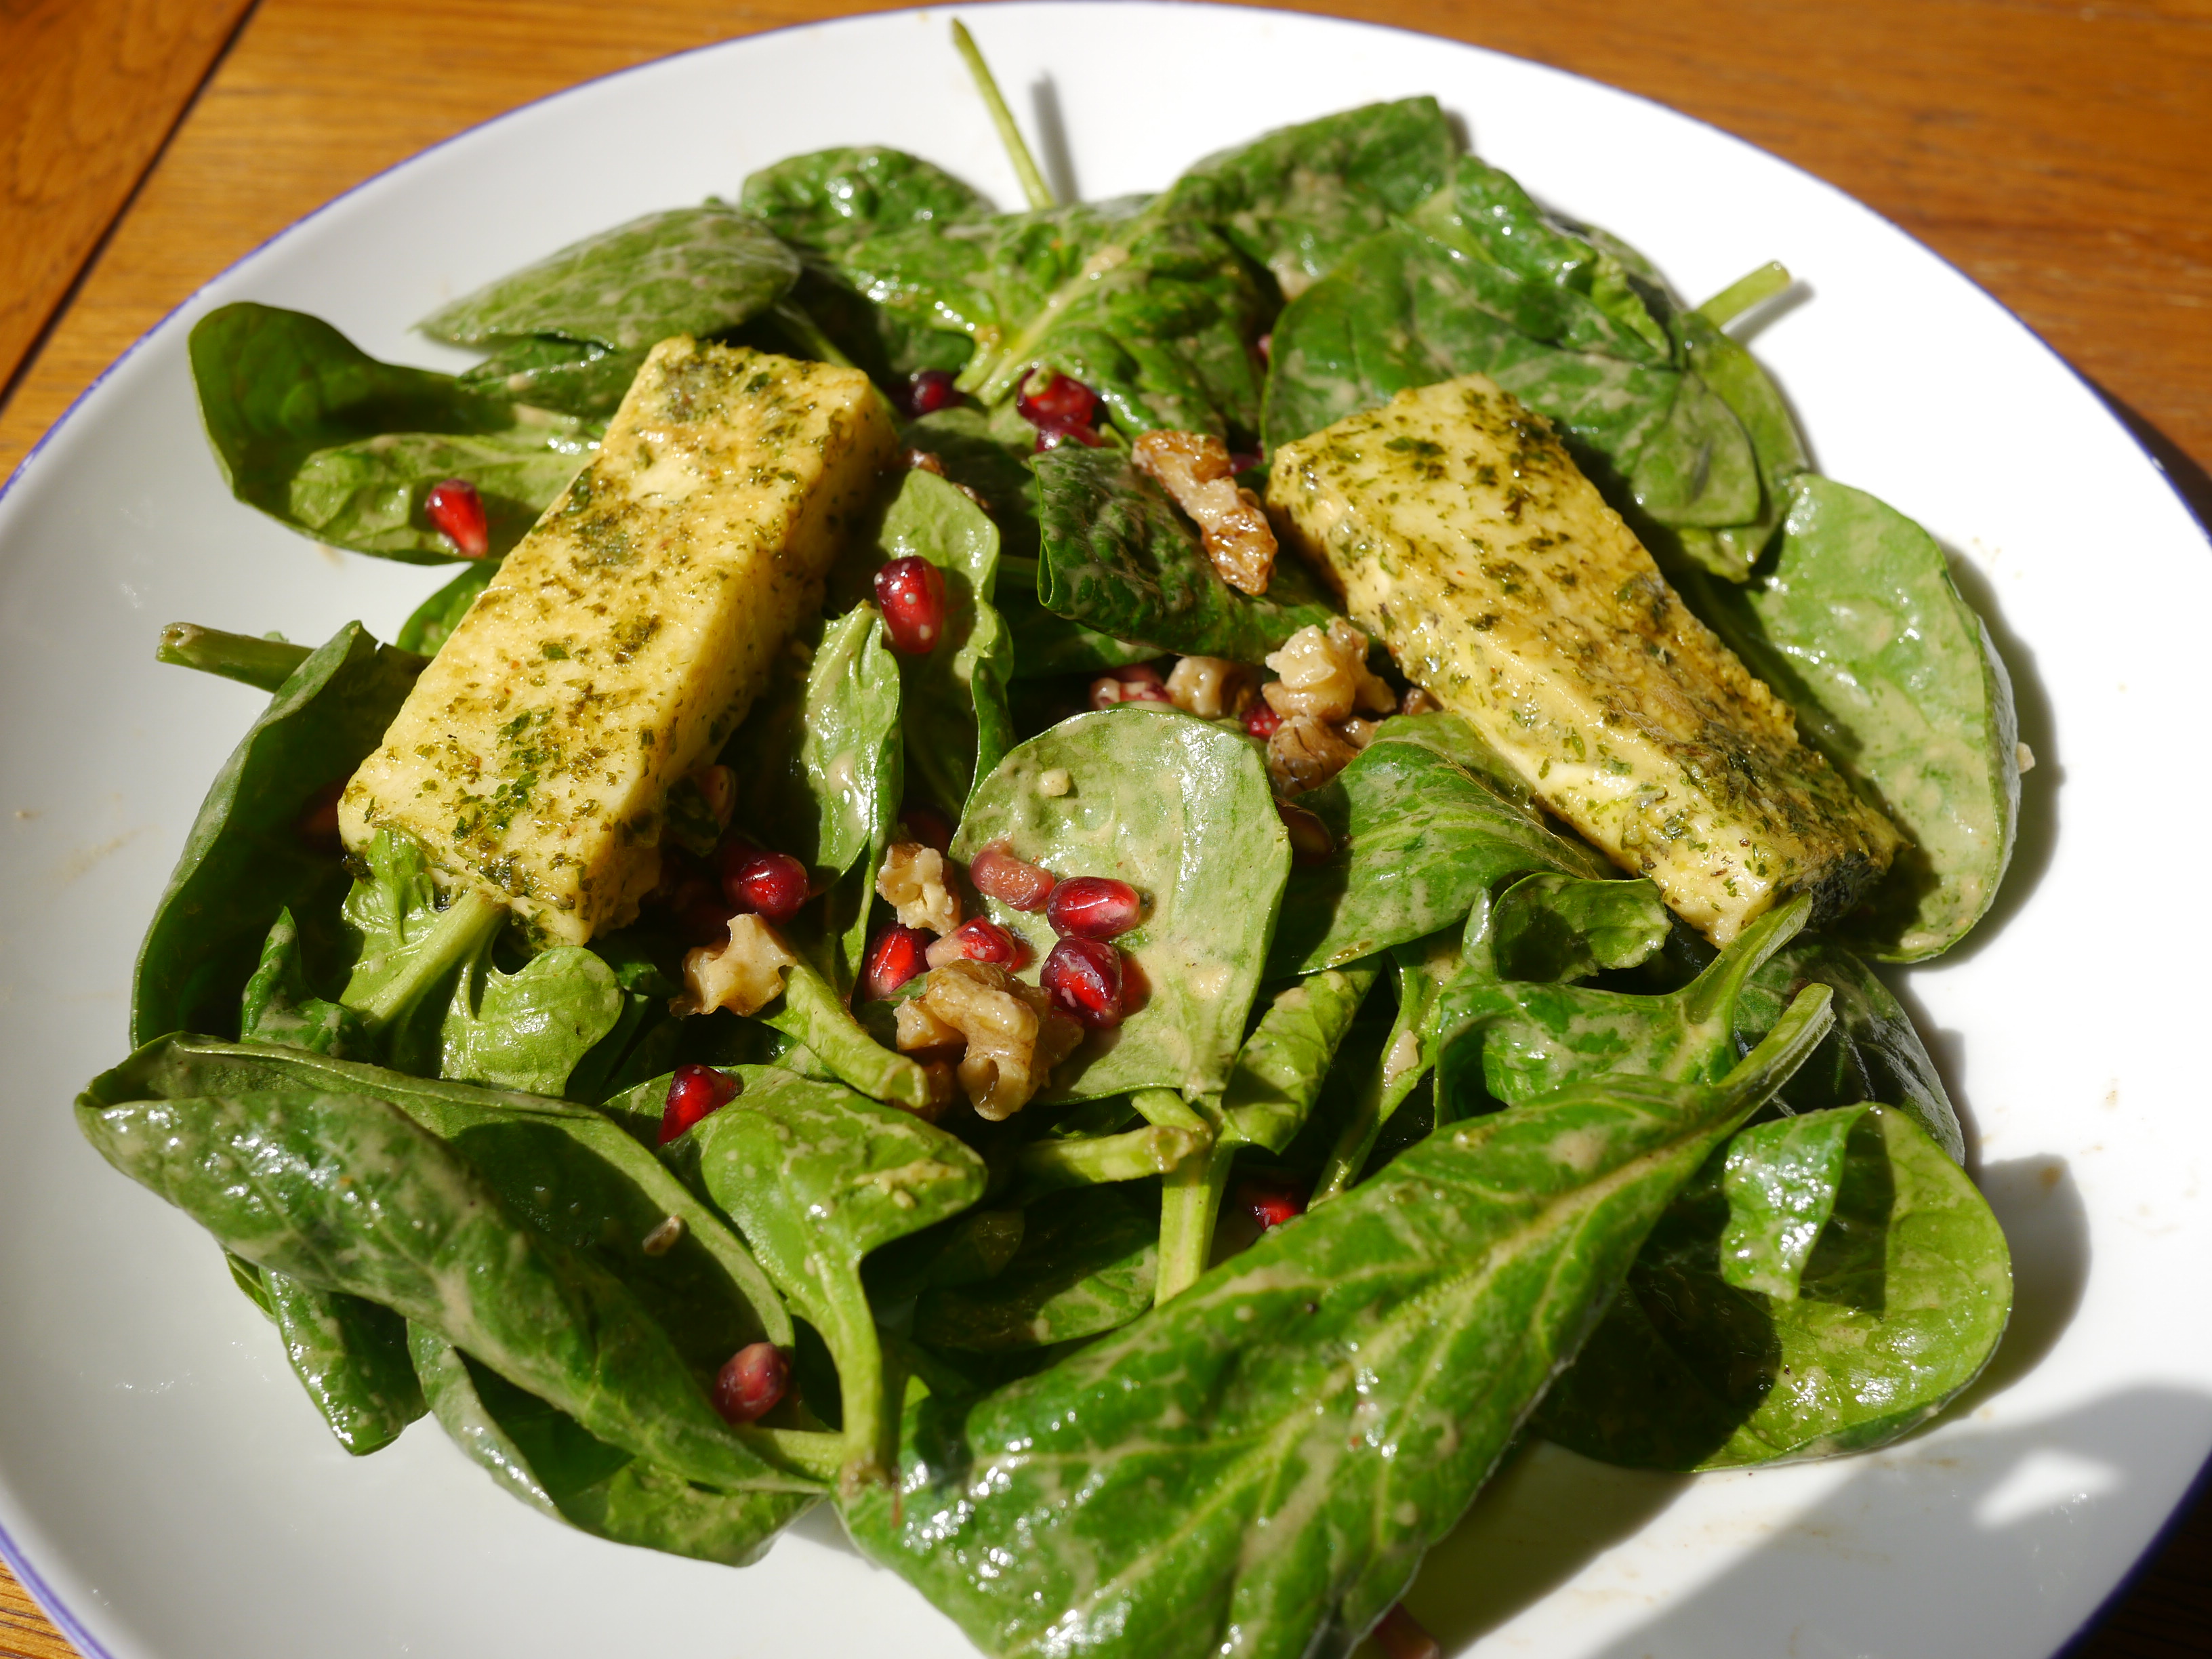 Marinated Halloumi & Spinach Salad with Maille Harissa Dressing